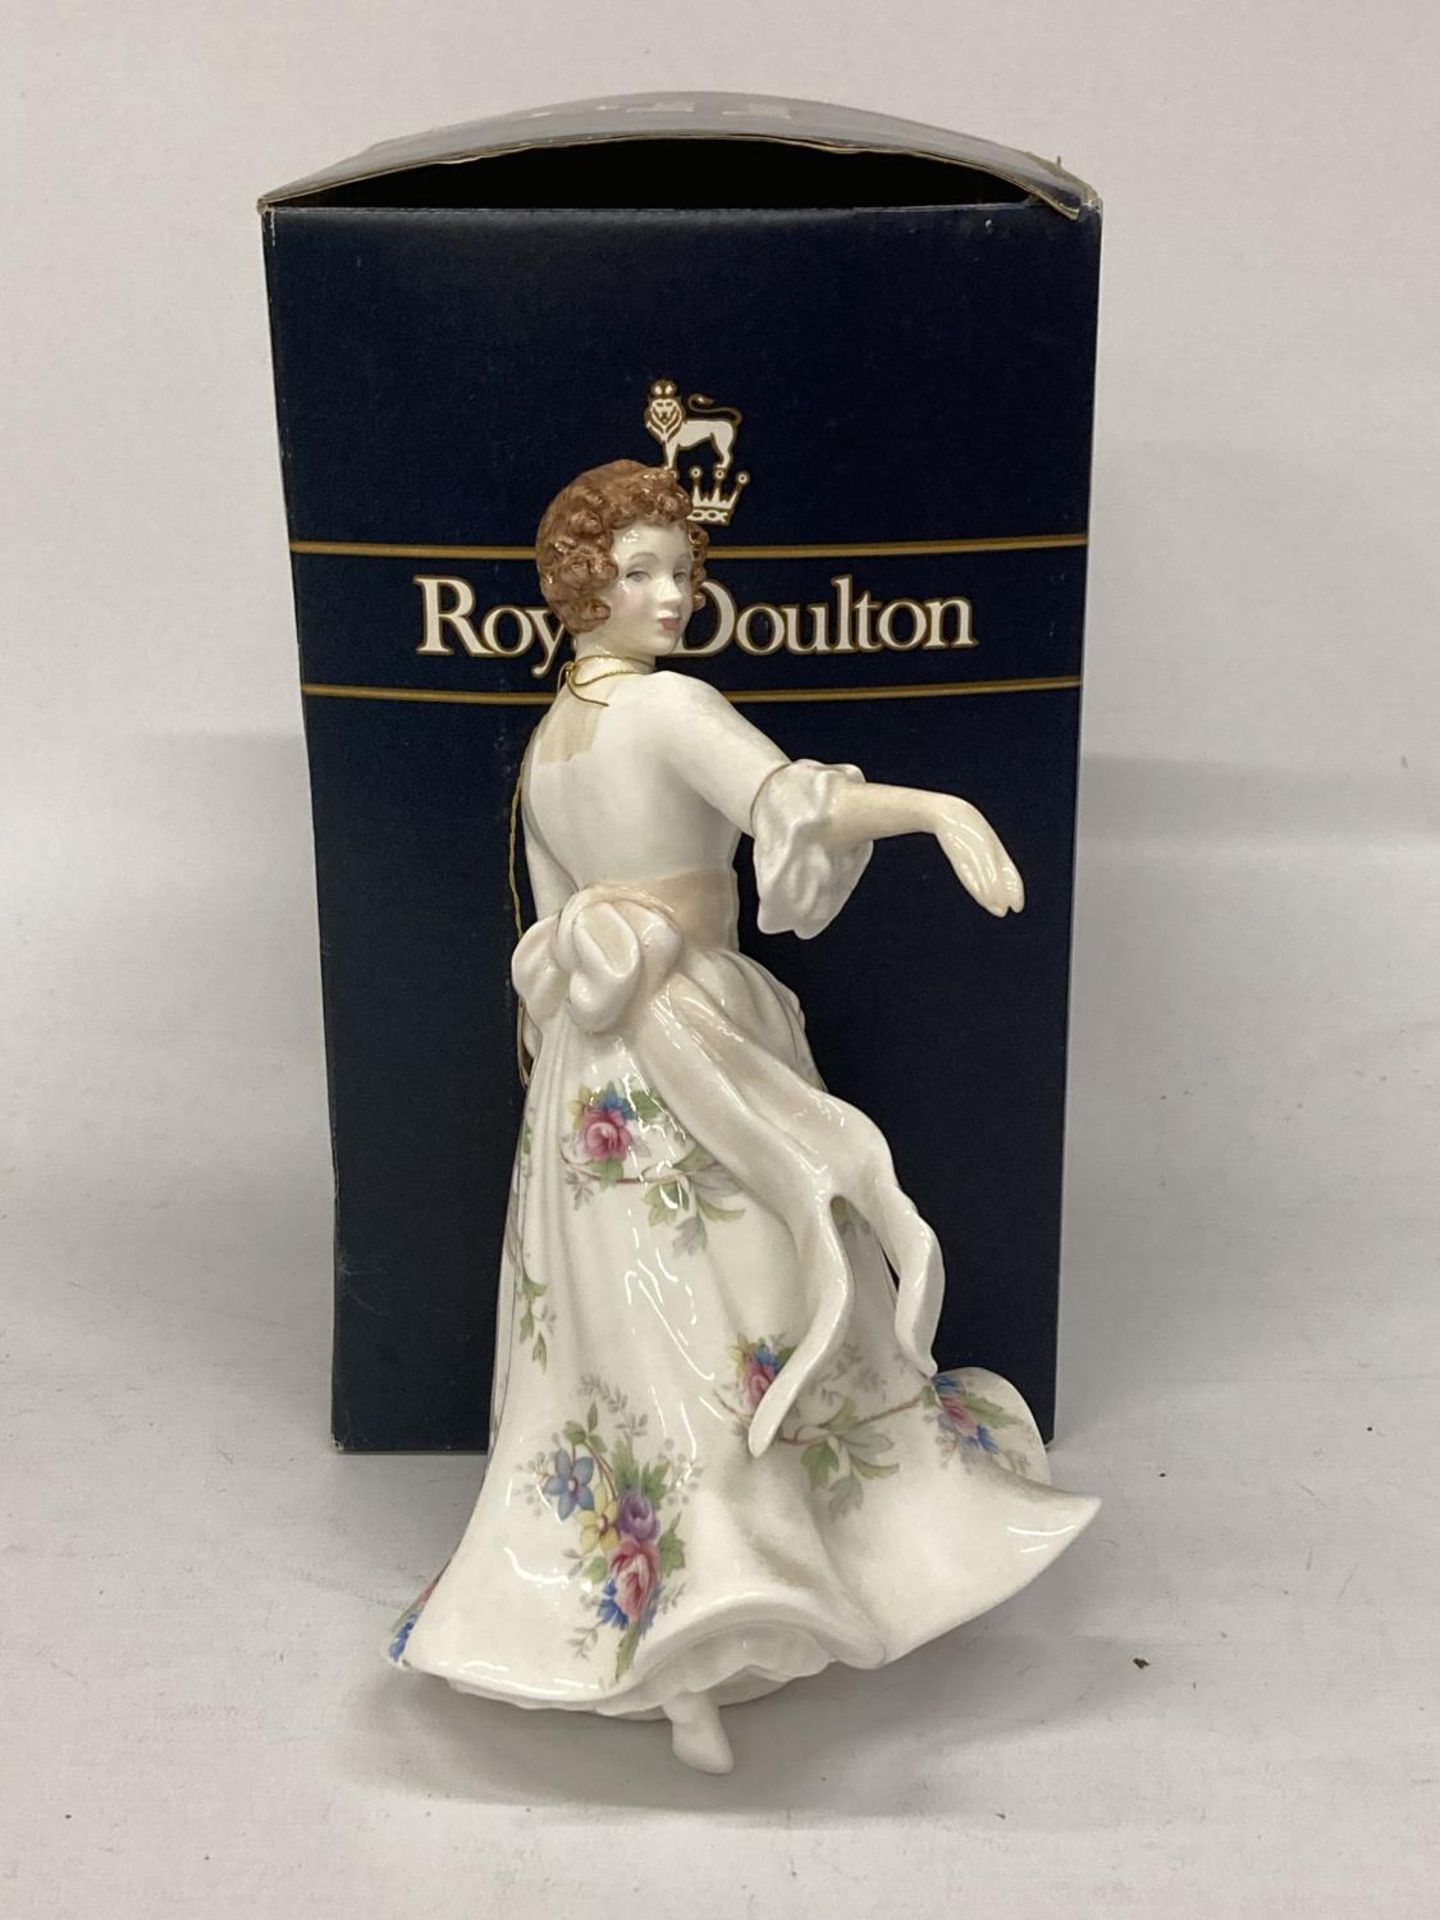 A ROYAL DOULTON FIGURINE MODELLED BY PEGGY DAVIES "HAZEL" HN3167 - Image 2 of 4